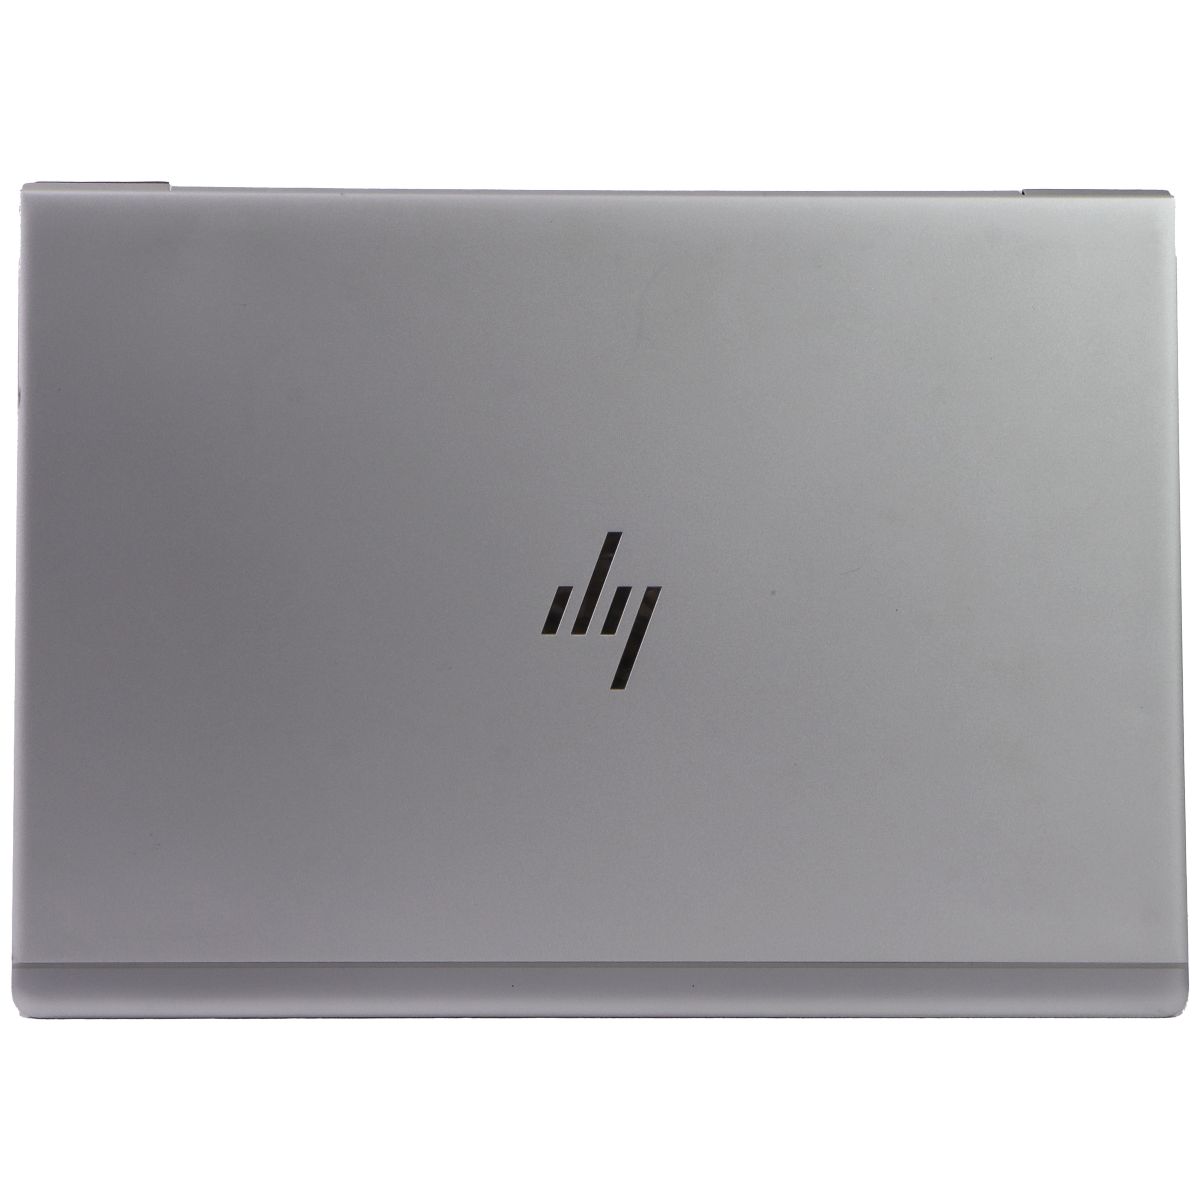 HP EliteBook 840 G6 13-in FHD Touch Laptop (HSN-I24C-4) i5-8265U/256GB/32GB/Home Laptops - PC Laptops & Netbooks HP    - Simple Cell Bulk Wholesale Pricing - USA Seller